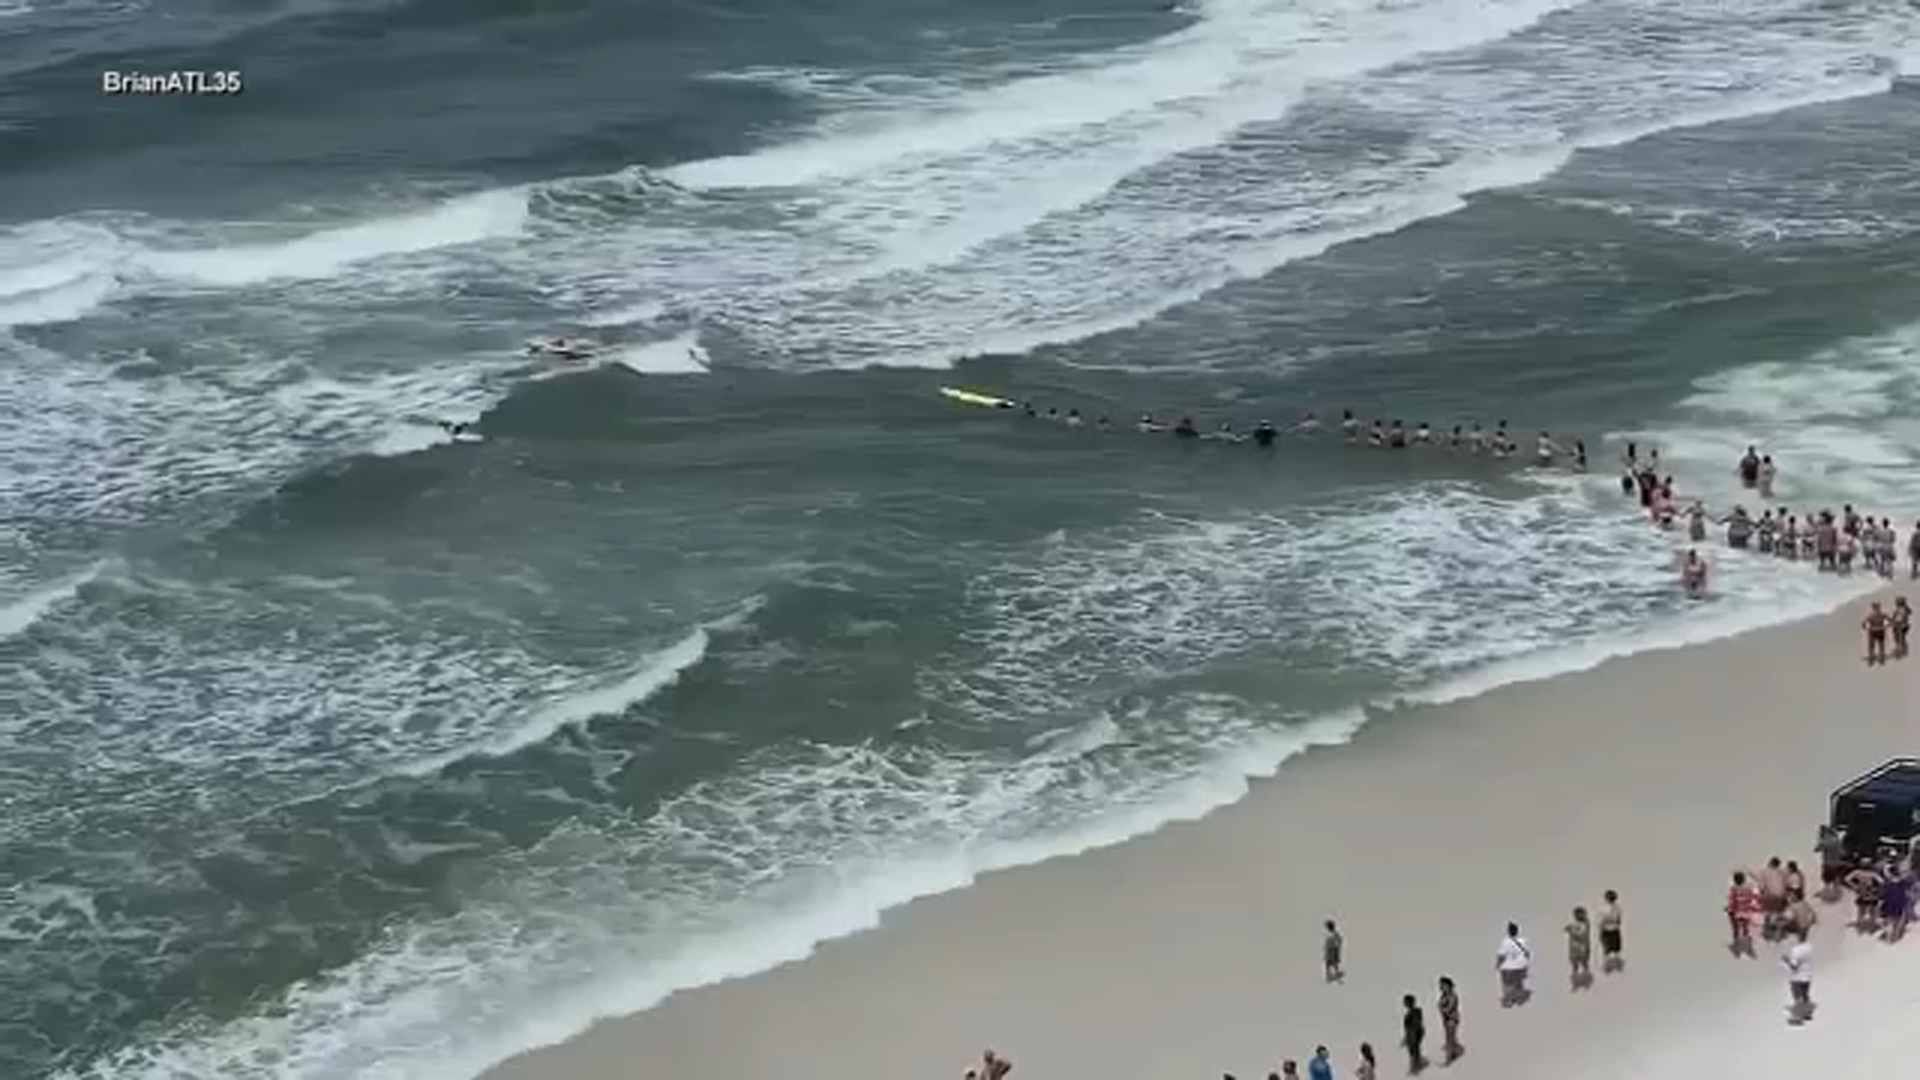 Beachgoers Form Human Chain To Rescue Swimmer From Rip Curs At Panama City Beach...